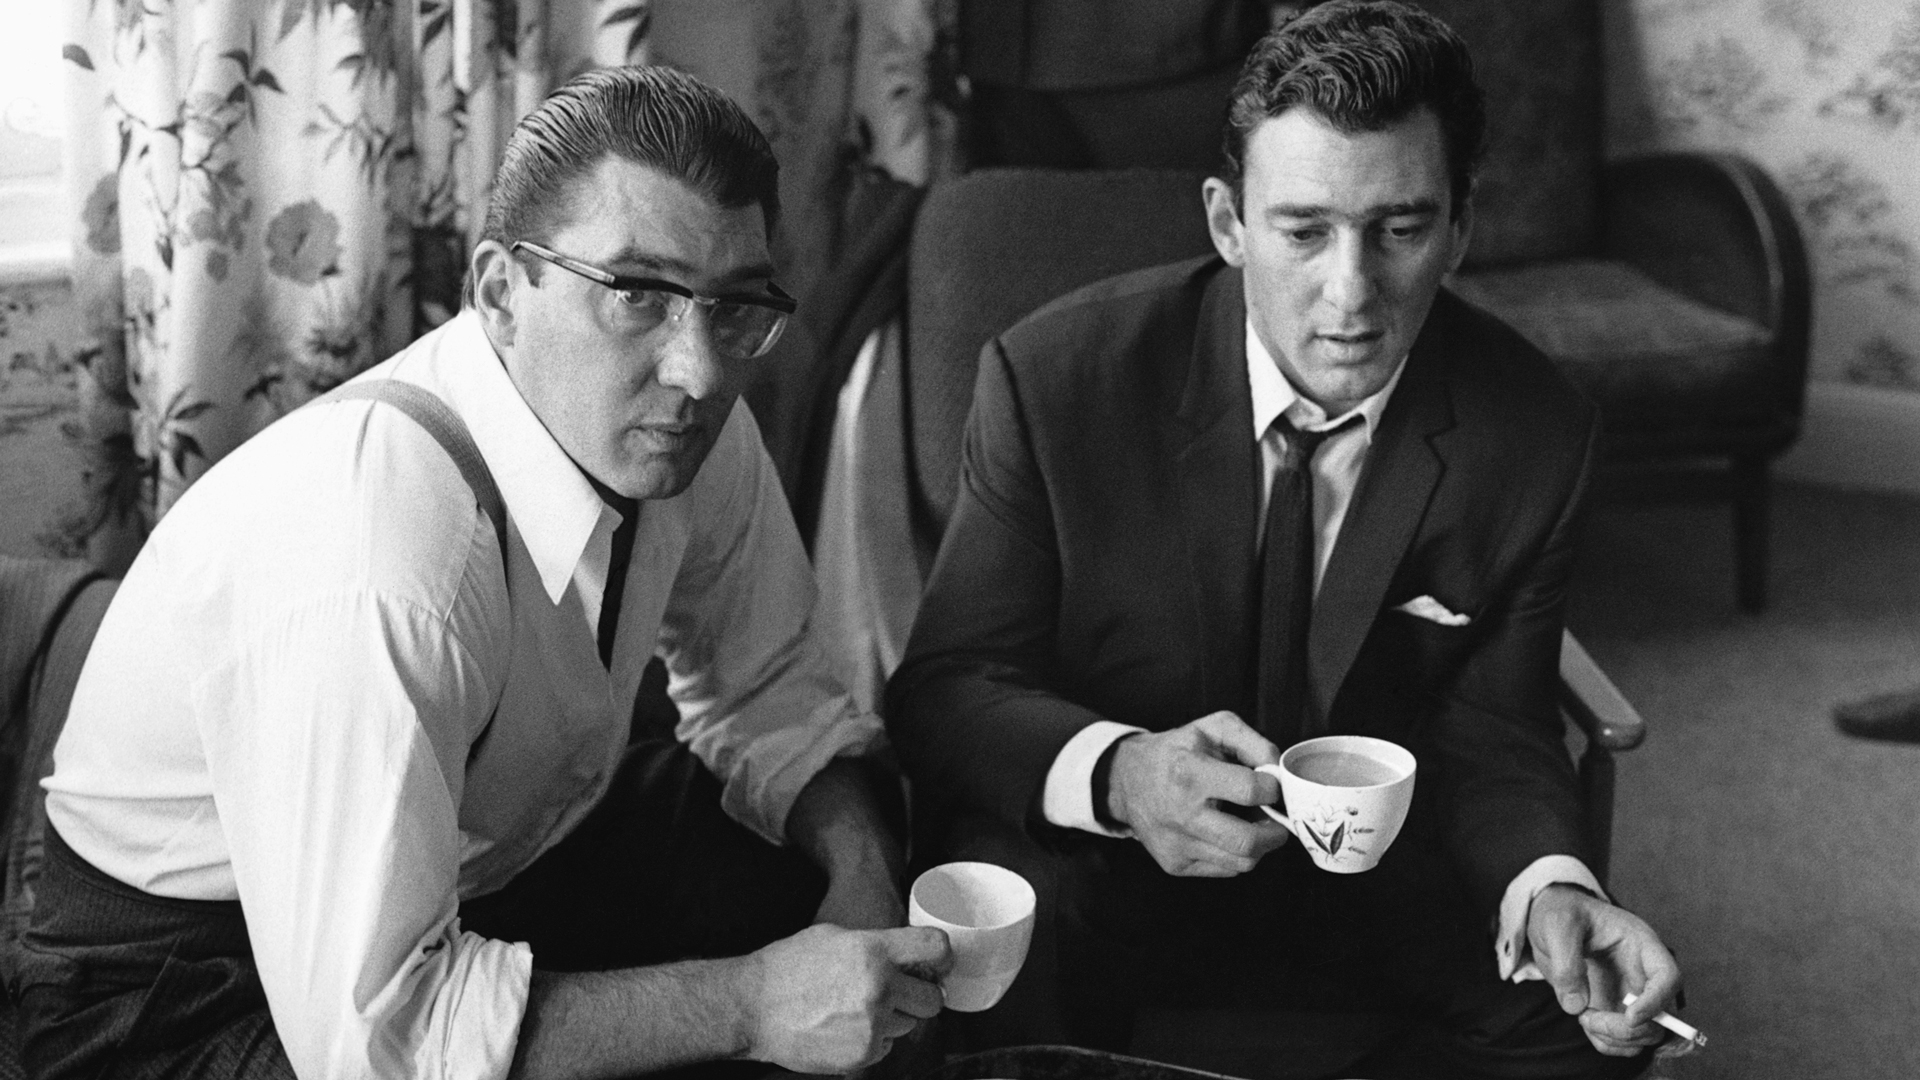 The Kray Twins: British Gangsters Mingled with Celebrities While Murdering&E True Crime